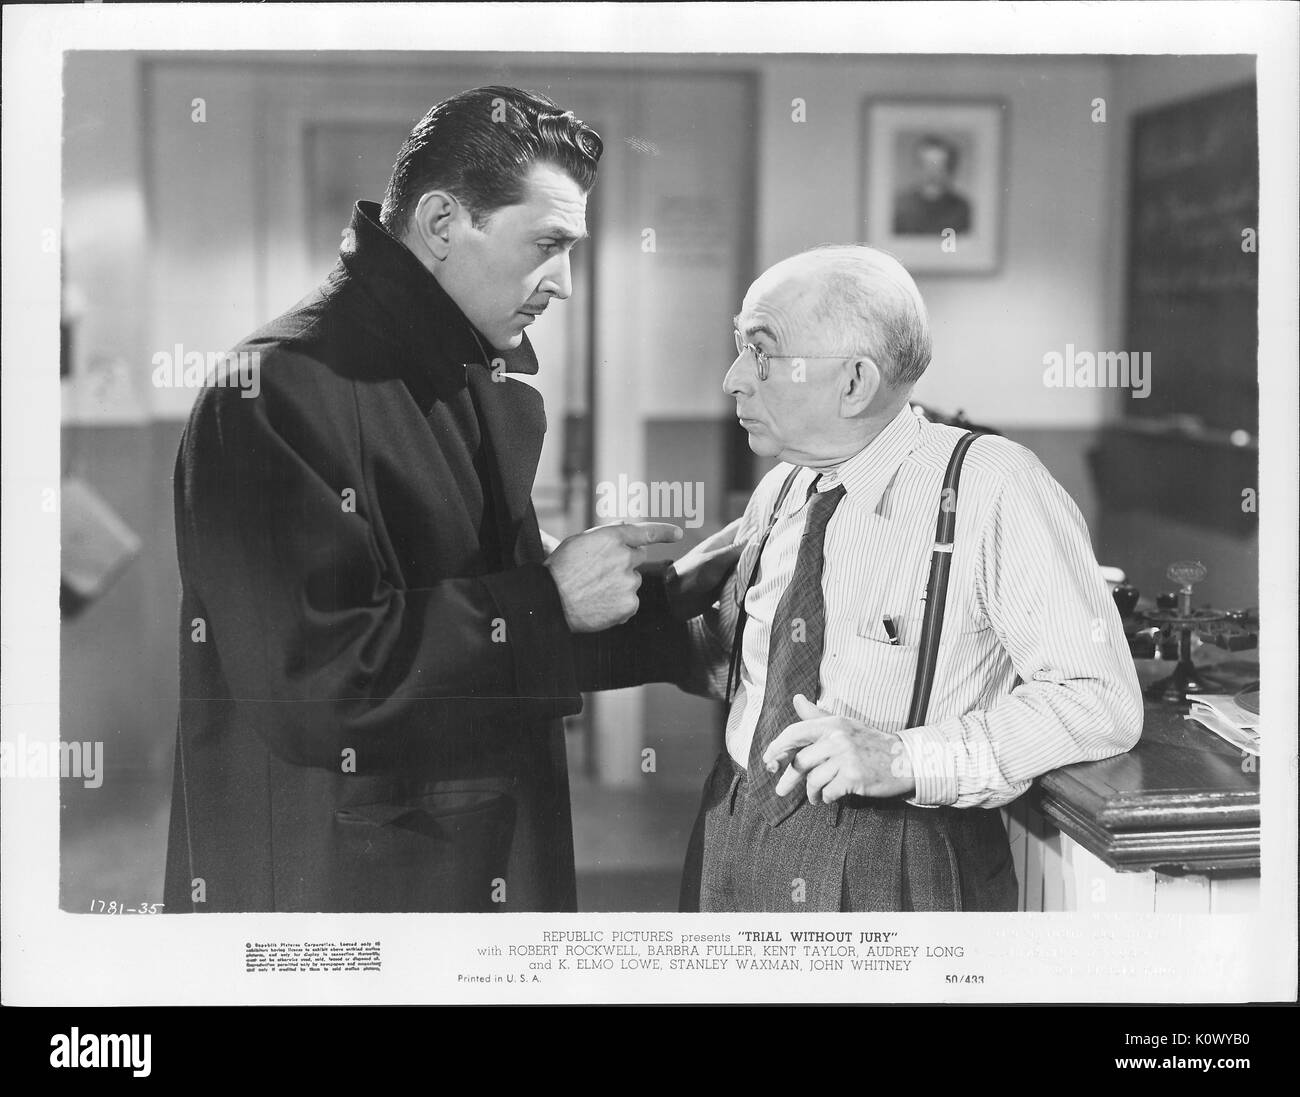 A movie still scene from 'Trial Without Jury' (1950 Republic Pictures mystery film), showing a handsome man in dark suit squatting seemingly admonishing a cigar-smoking bespectacled old man wearing a striped long-sleeved shirt with a tie and suspenders, 1950. Stock Photo